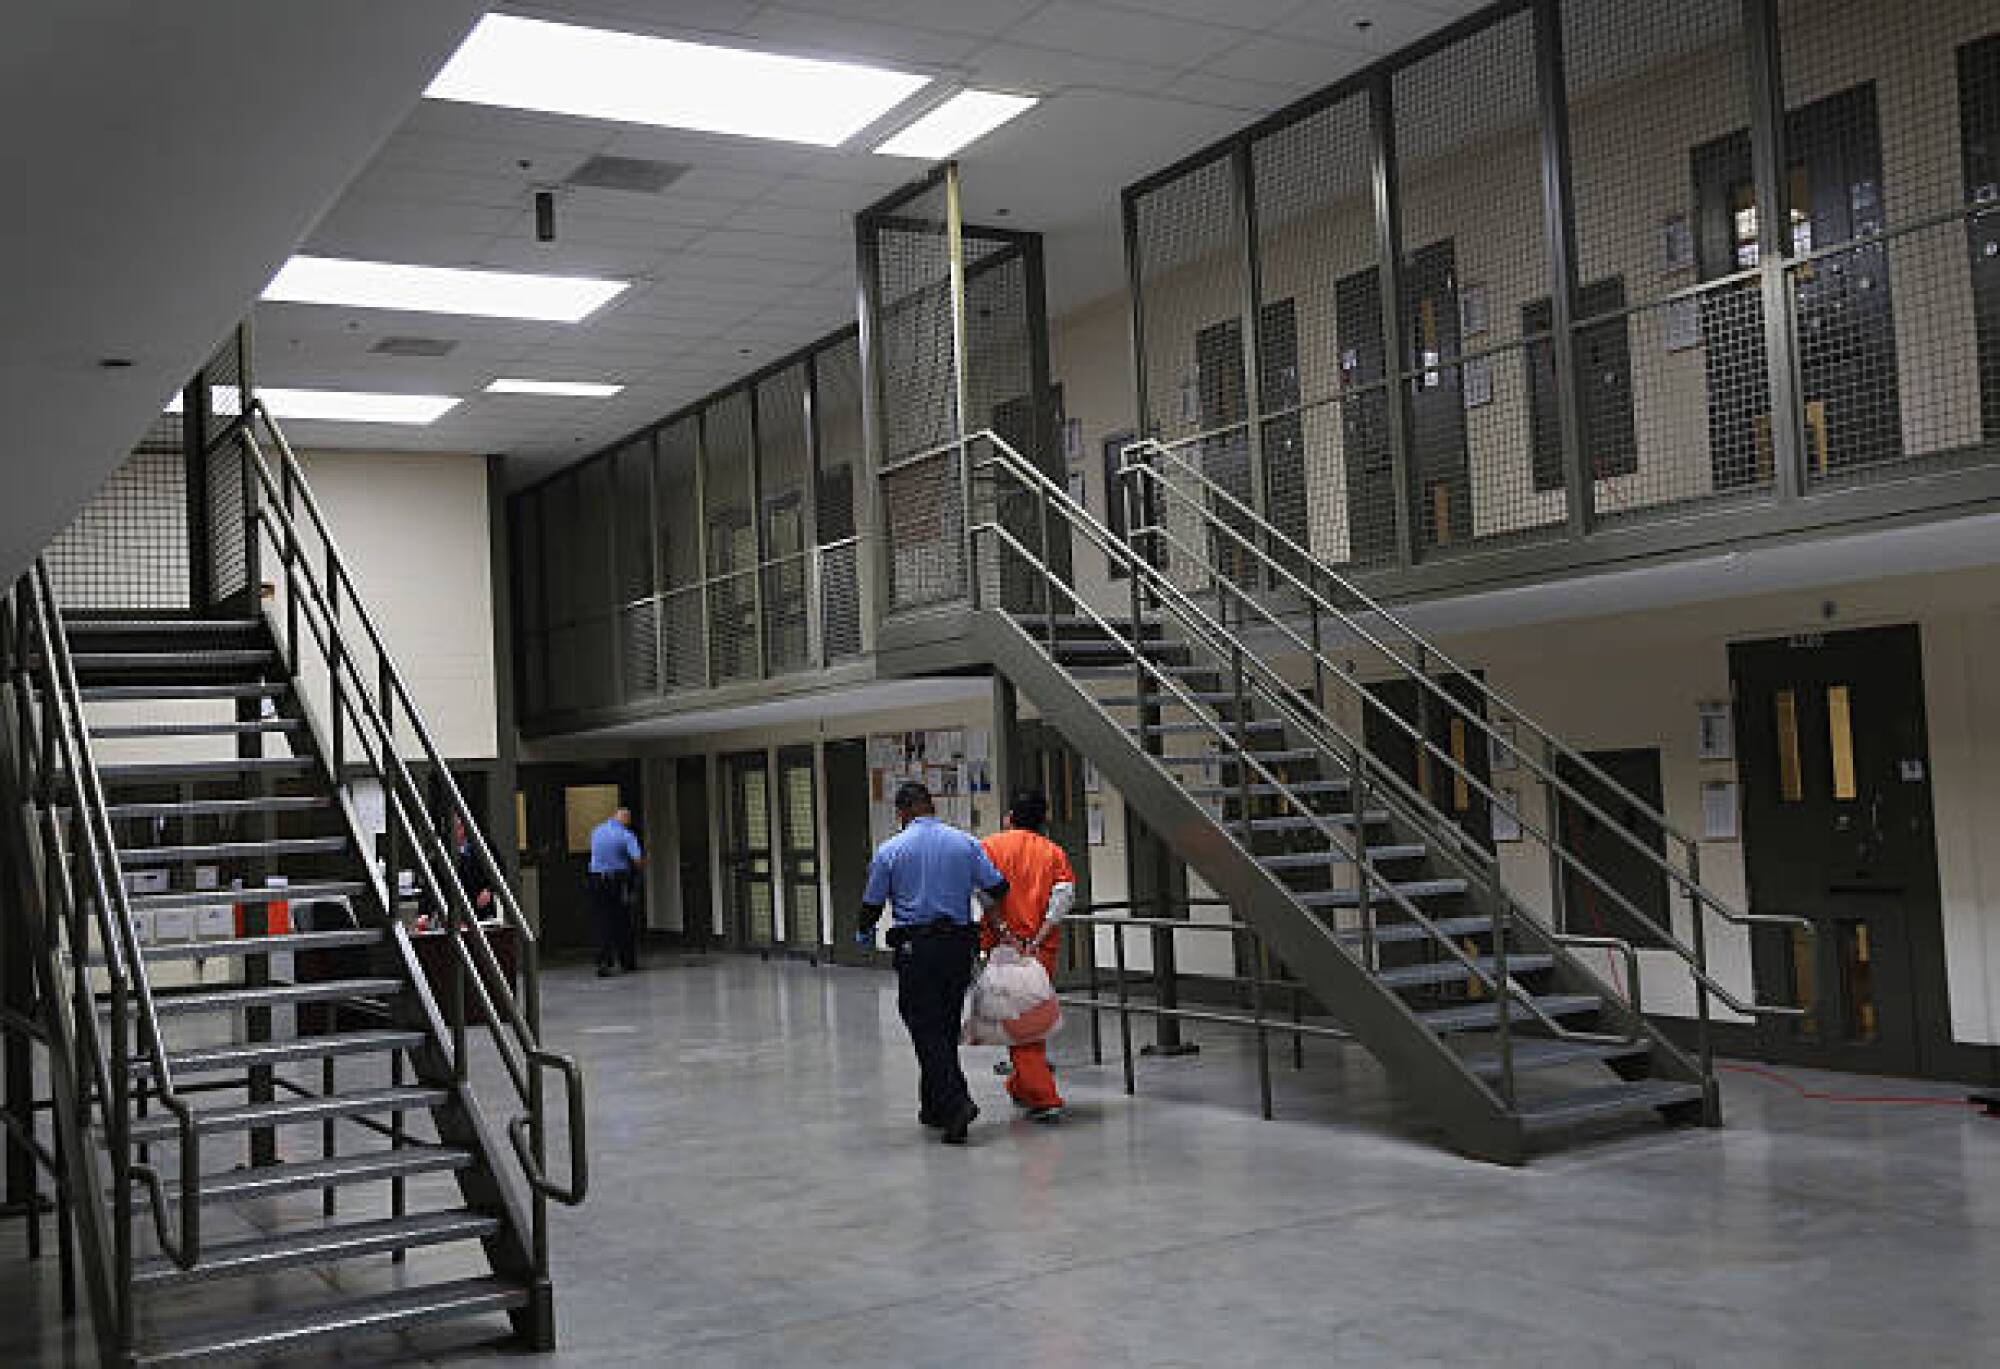 A guard in uniform, left, walks with an immigrant detainee in an orange suit